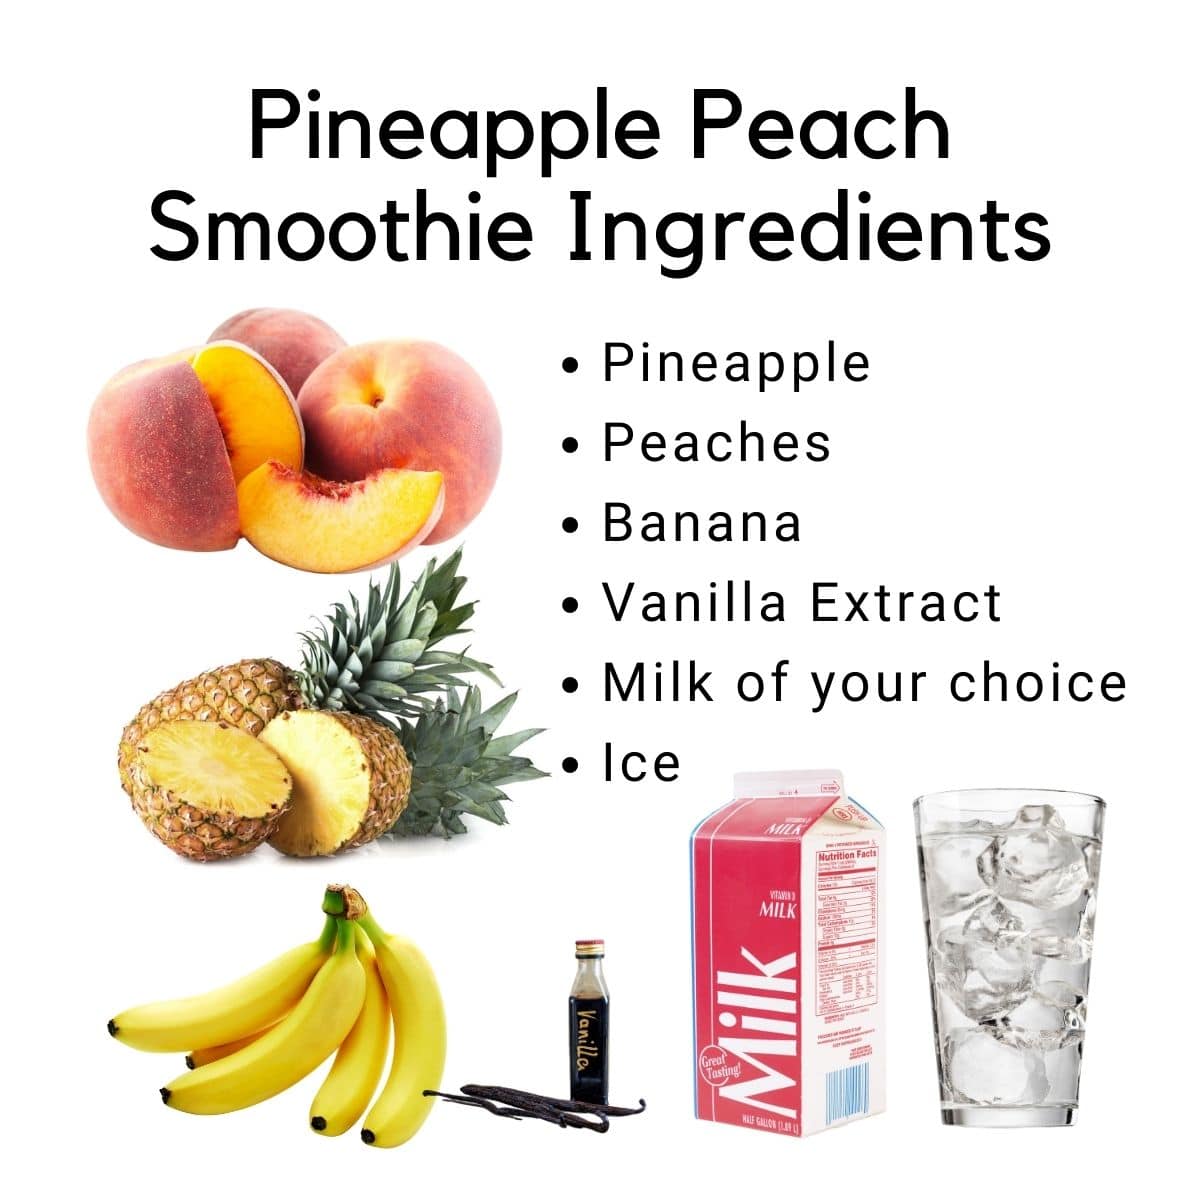 A chart of Pineapple Peach Smoothie Ingredients.